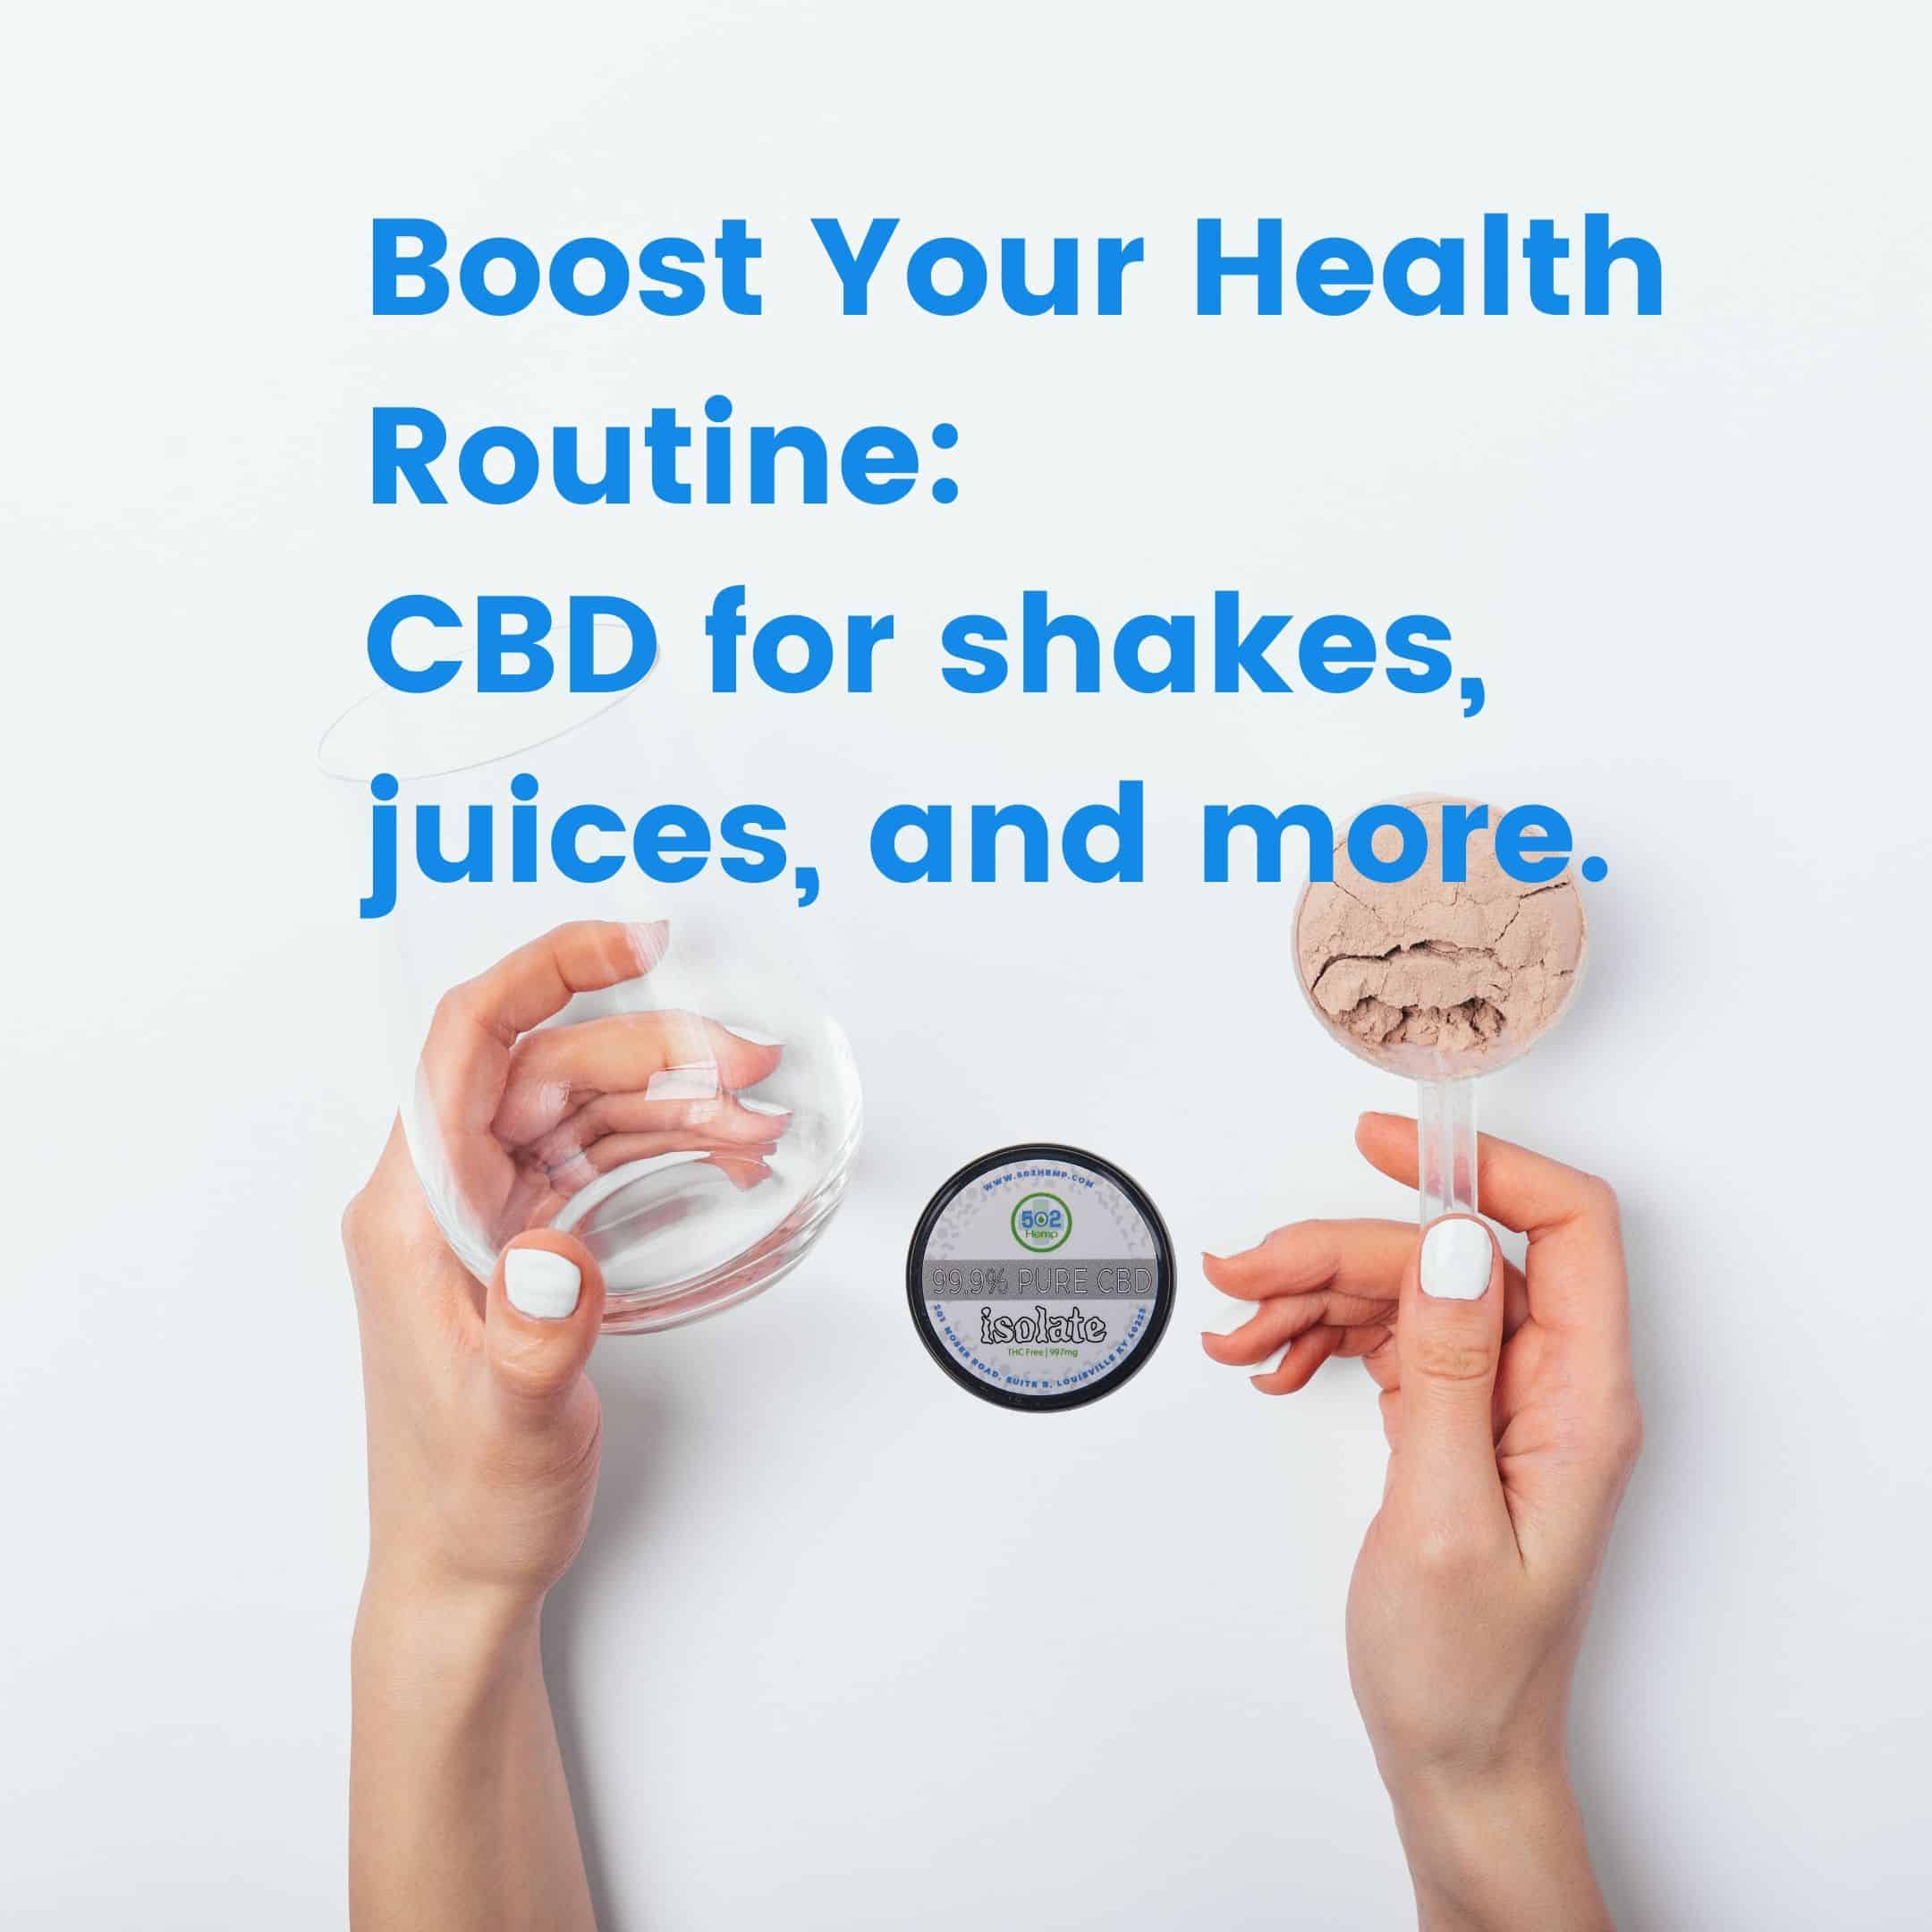 Boost Your Health Routine: CBD for Shakes, Juices, and More.